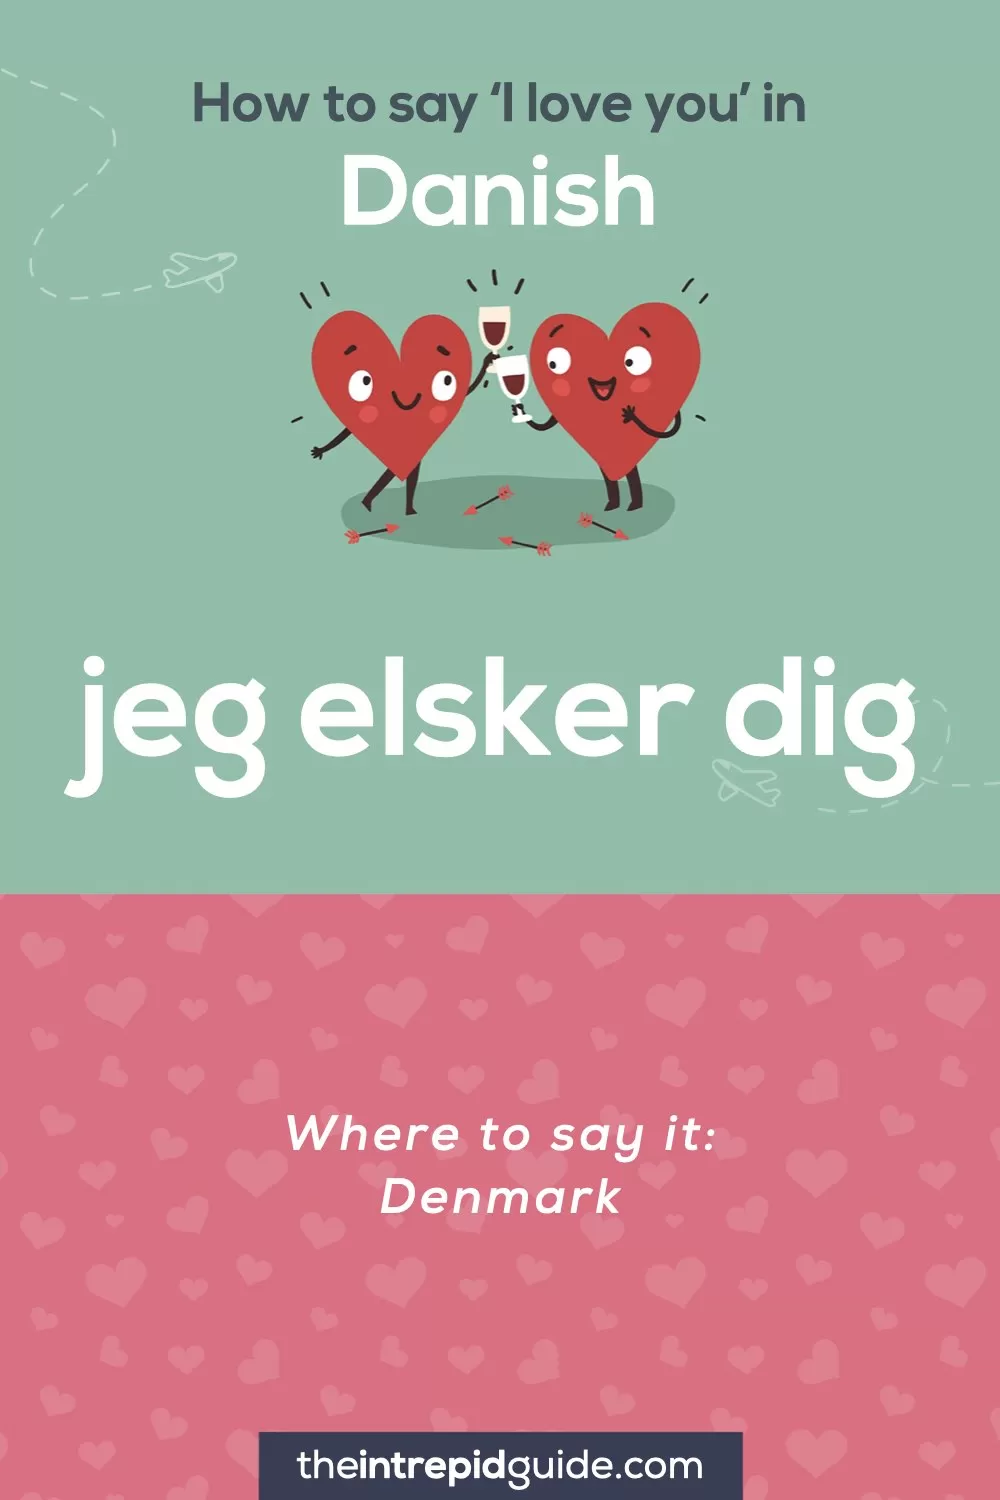 How to say I love you in different languages - Danish - Jeg elsker dig